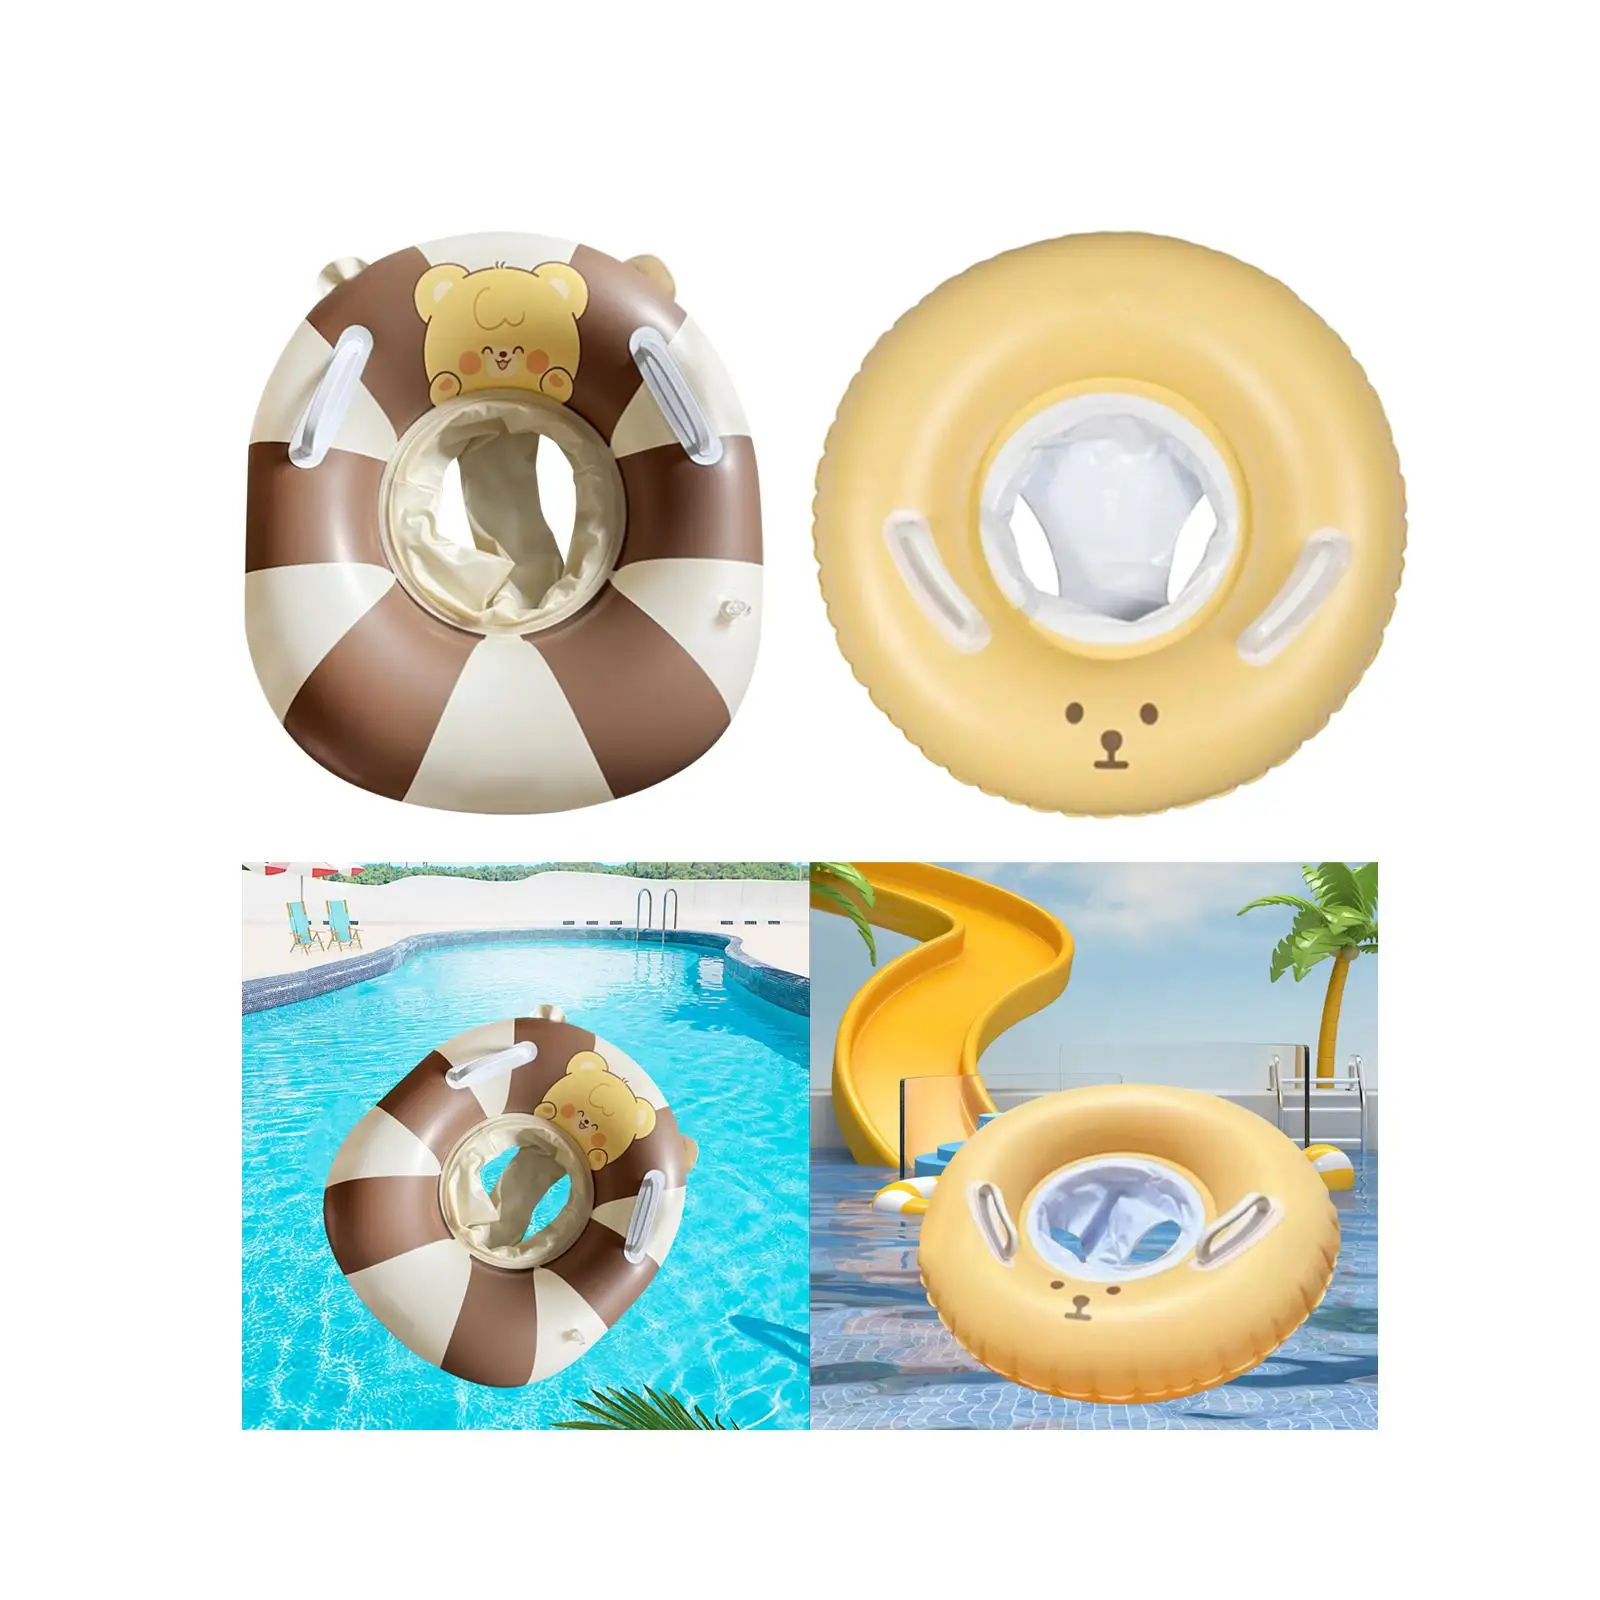 Kids Swimming Rings Durable PVC Floating Toy Inflatable Pool Floats Seat